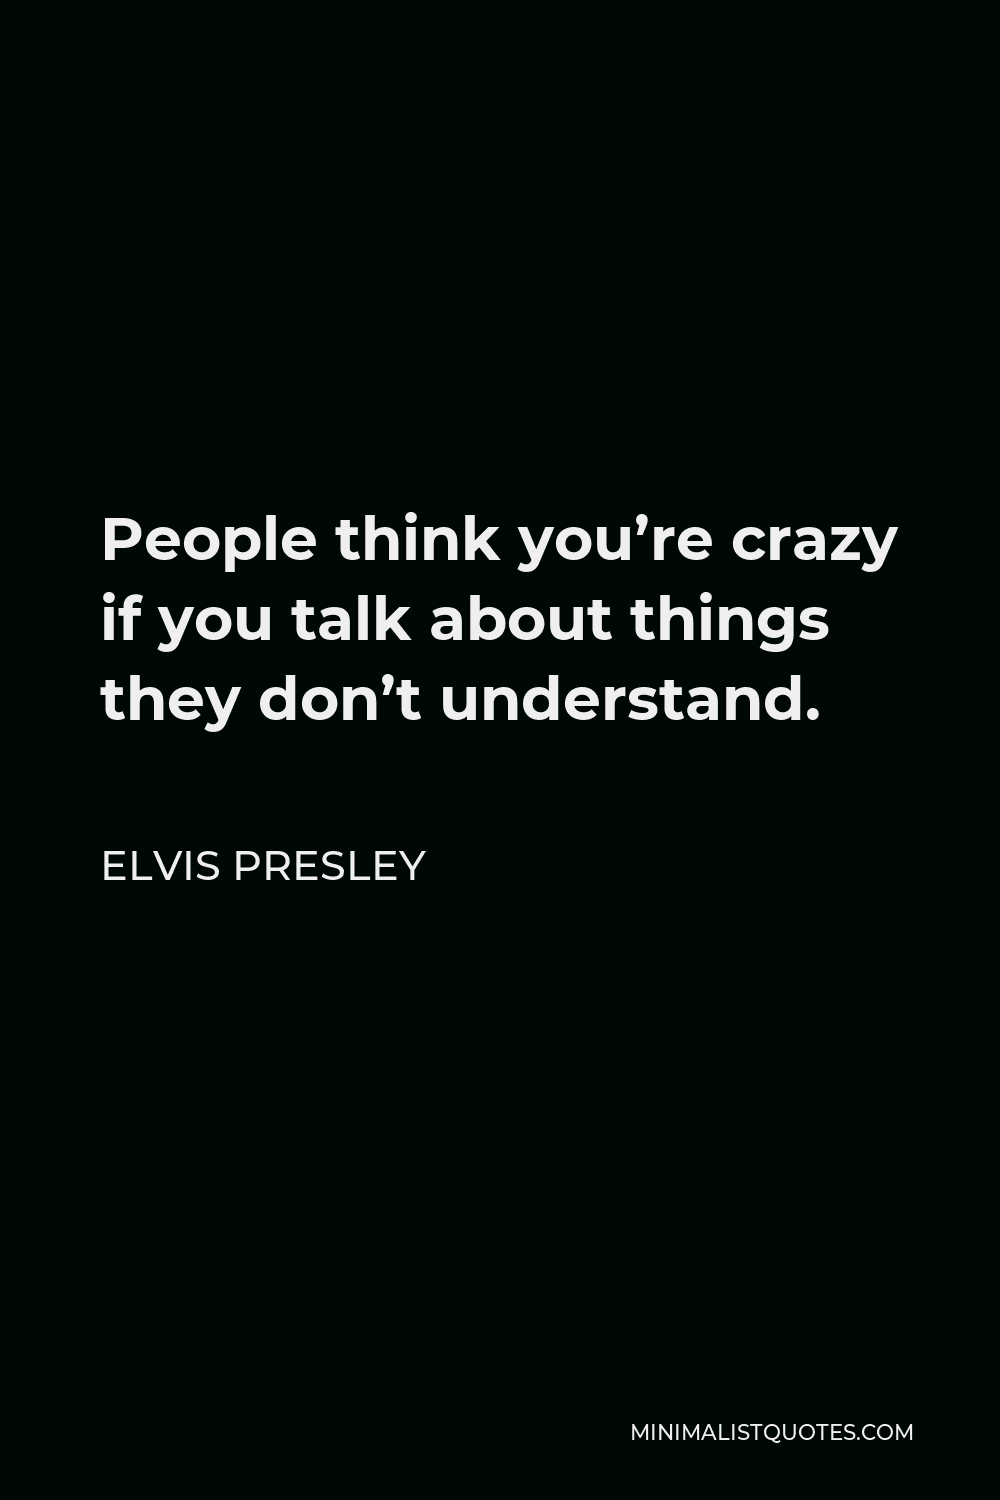 Elvis Presley Quote - People think you’re crazy if you talk about things they don’t understand.